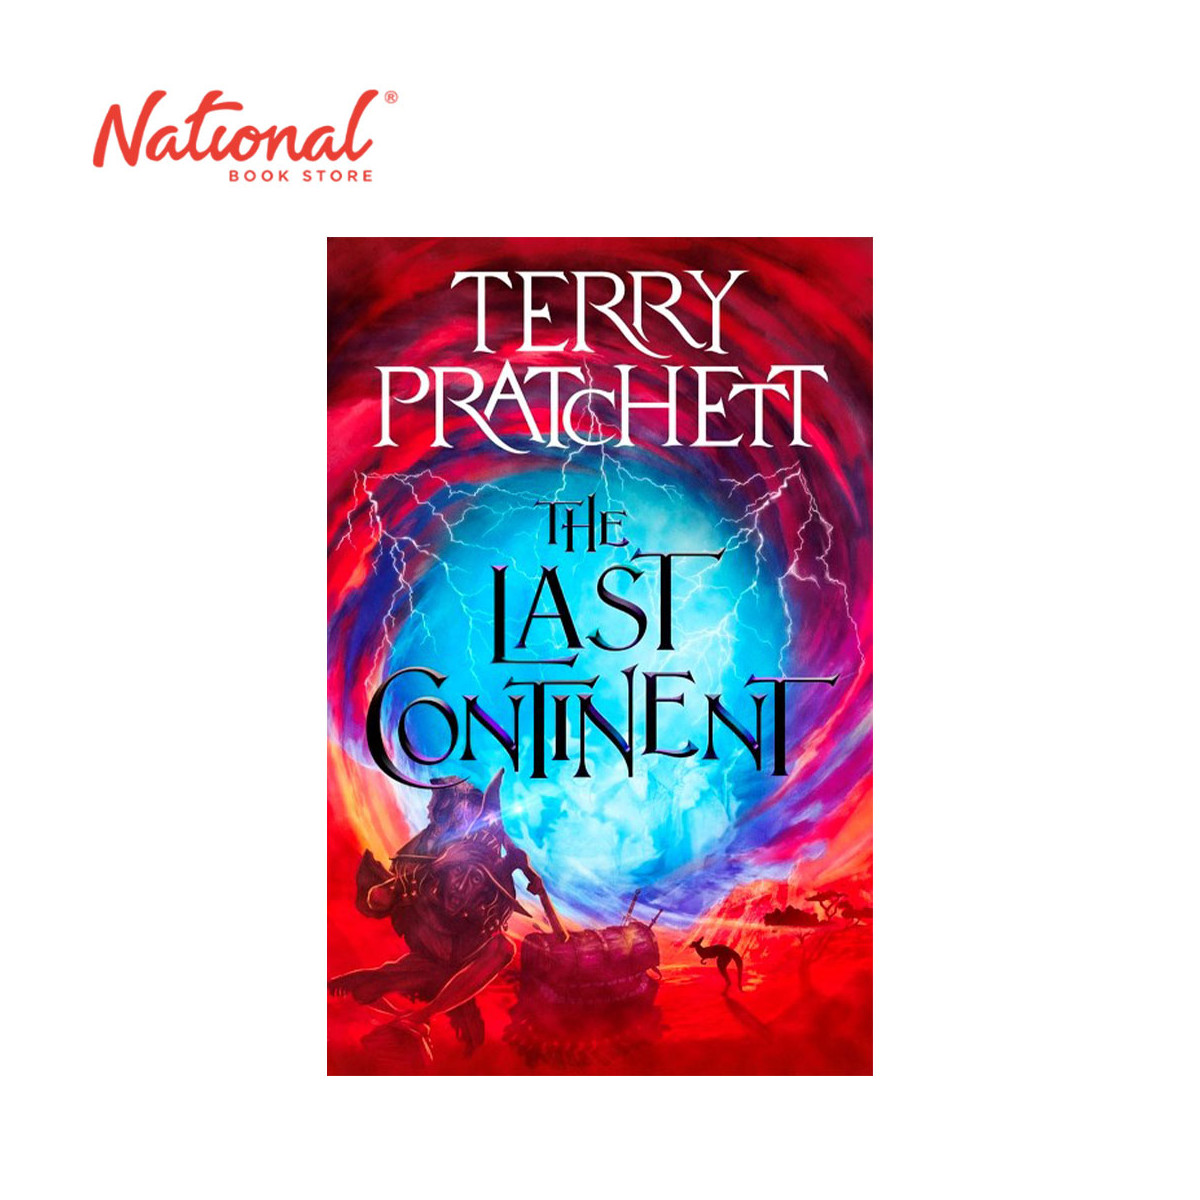 *PRE-ORDER* The Last Continent by Terry Pratchett - Trade Paperback - Sci-Fi, Fantasy & Horror